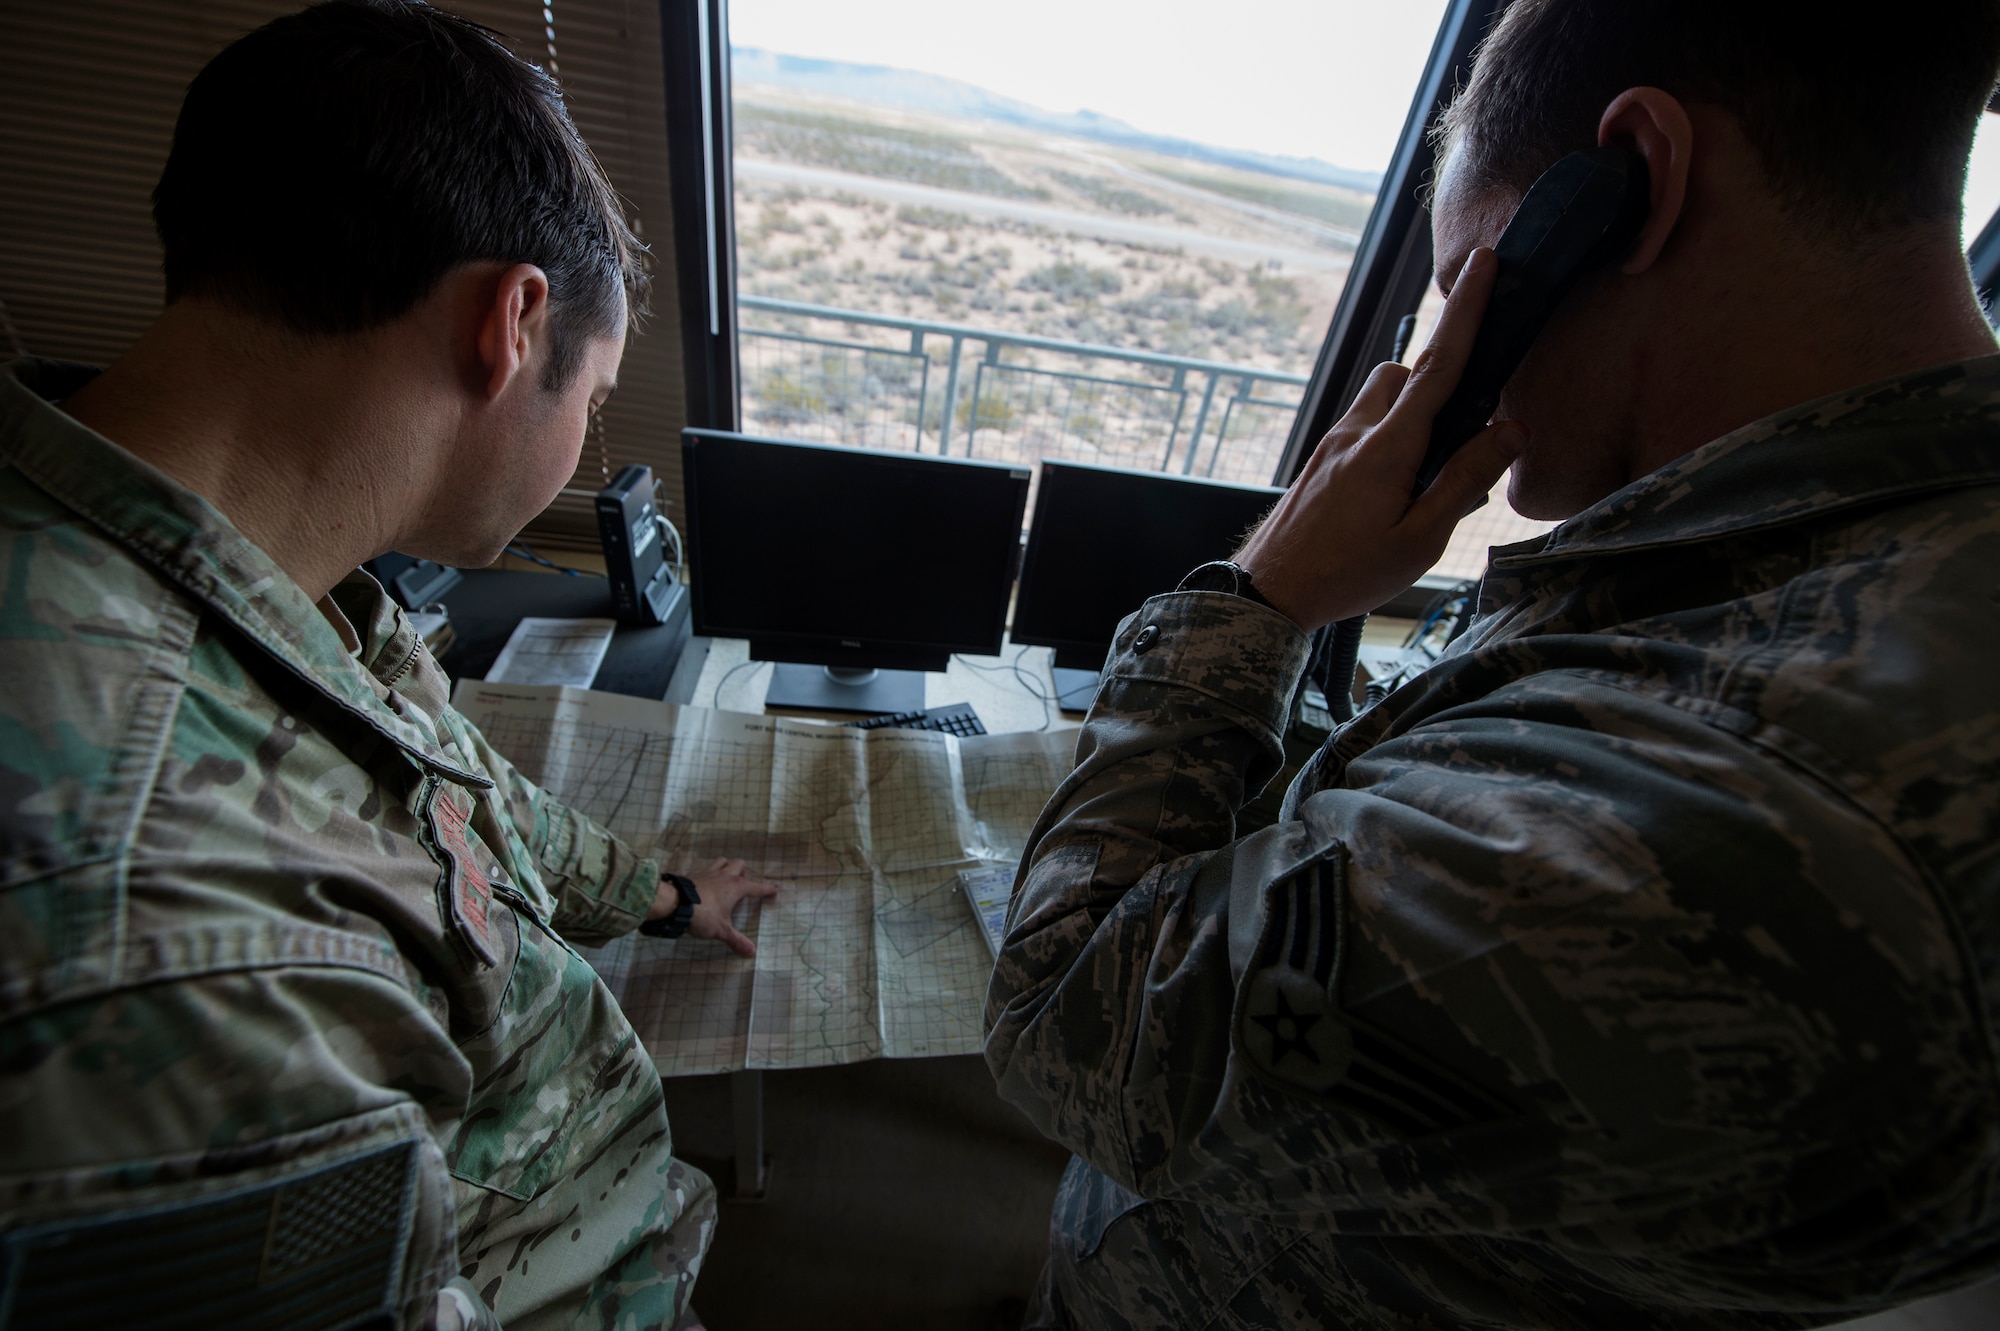 U.S. Air Force Staff Sgt. Derek Nennstiehl, left, and Senior Airman Jacob Mullen, 7th Air Support Operations Squadron joint terminal attack controllers, communicate with a B-52 Stratofortress pilot during the joint exercise, Iron Focus, Feb. 2, 2016, at the Oro Grande Training Complex at Fort Bliss, Texas. After receiving consent from JTACs, B-52 aircraft along with B-1B Lancers dropped live bombs on the range throughout the exercise. (U.S. Air Force photo by Senior Airman Olivia Dominique/Released)